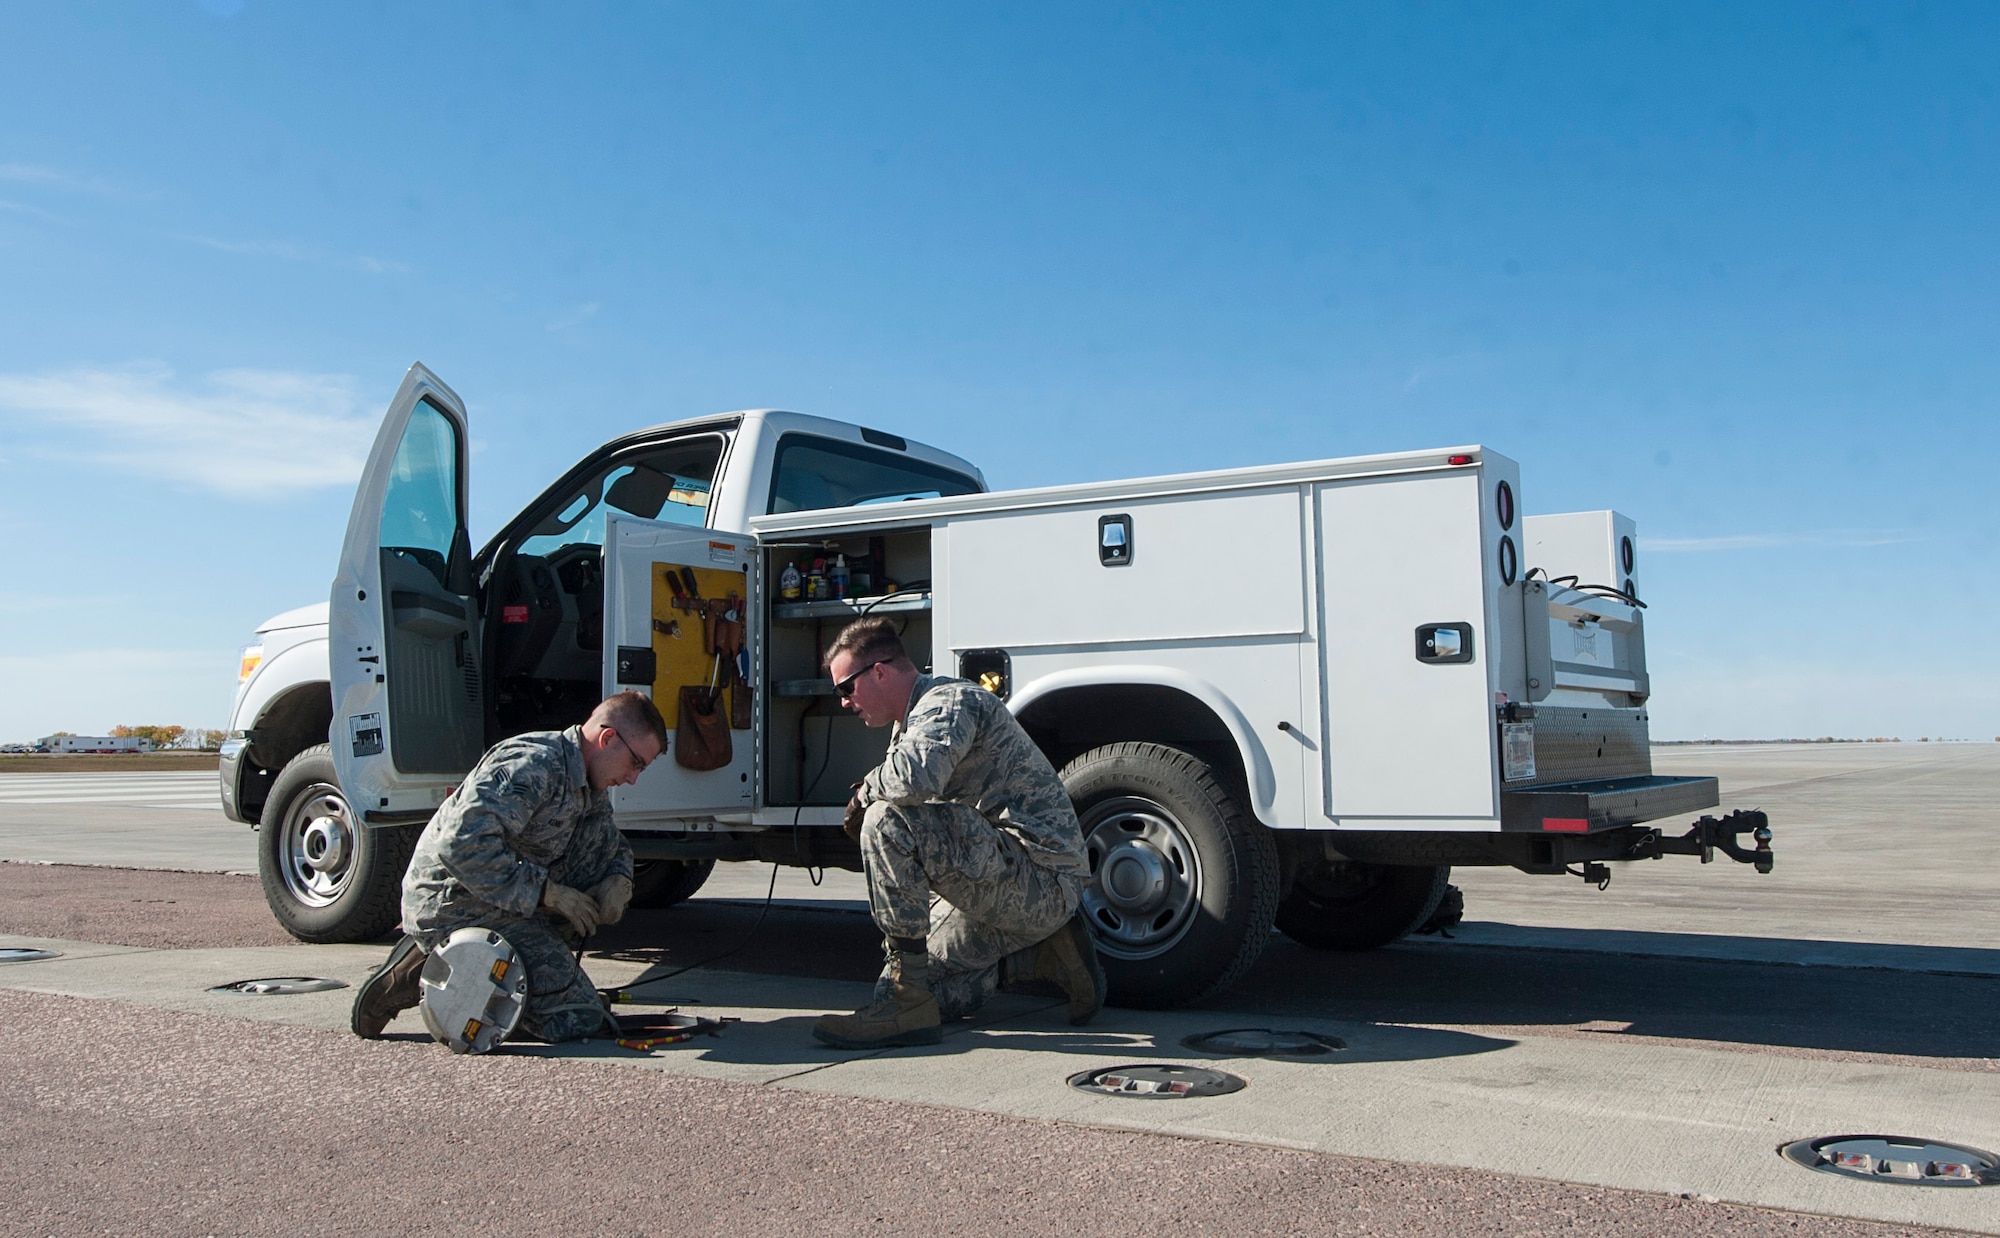 The 5th Civil Engineer Squadron electrical systems Airmen are responsible for maintaining all electrical systems on base, including airfield lighting systems, lighting protection systems and fire alarm systems.